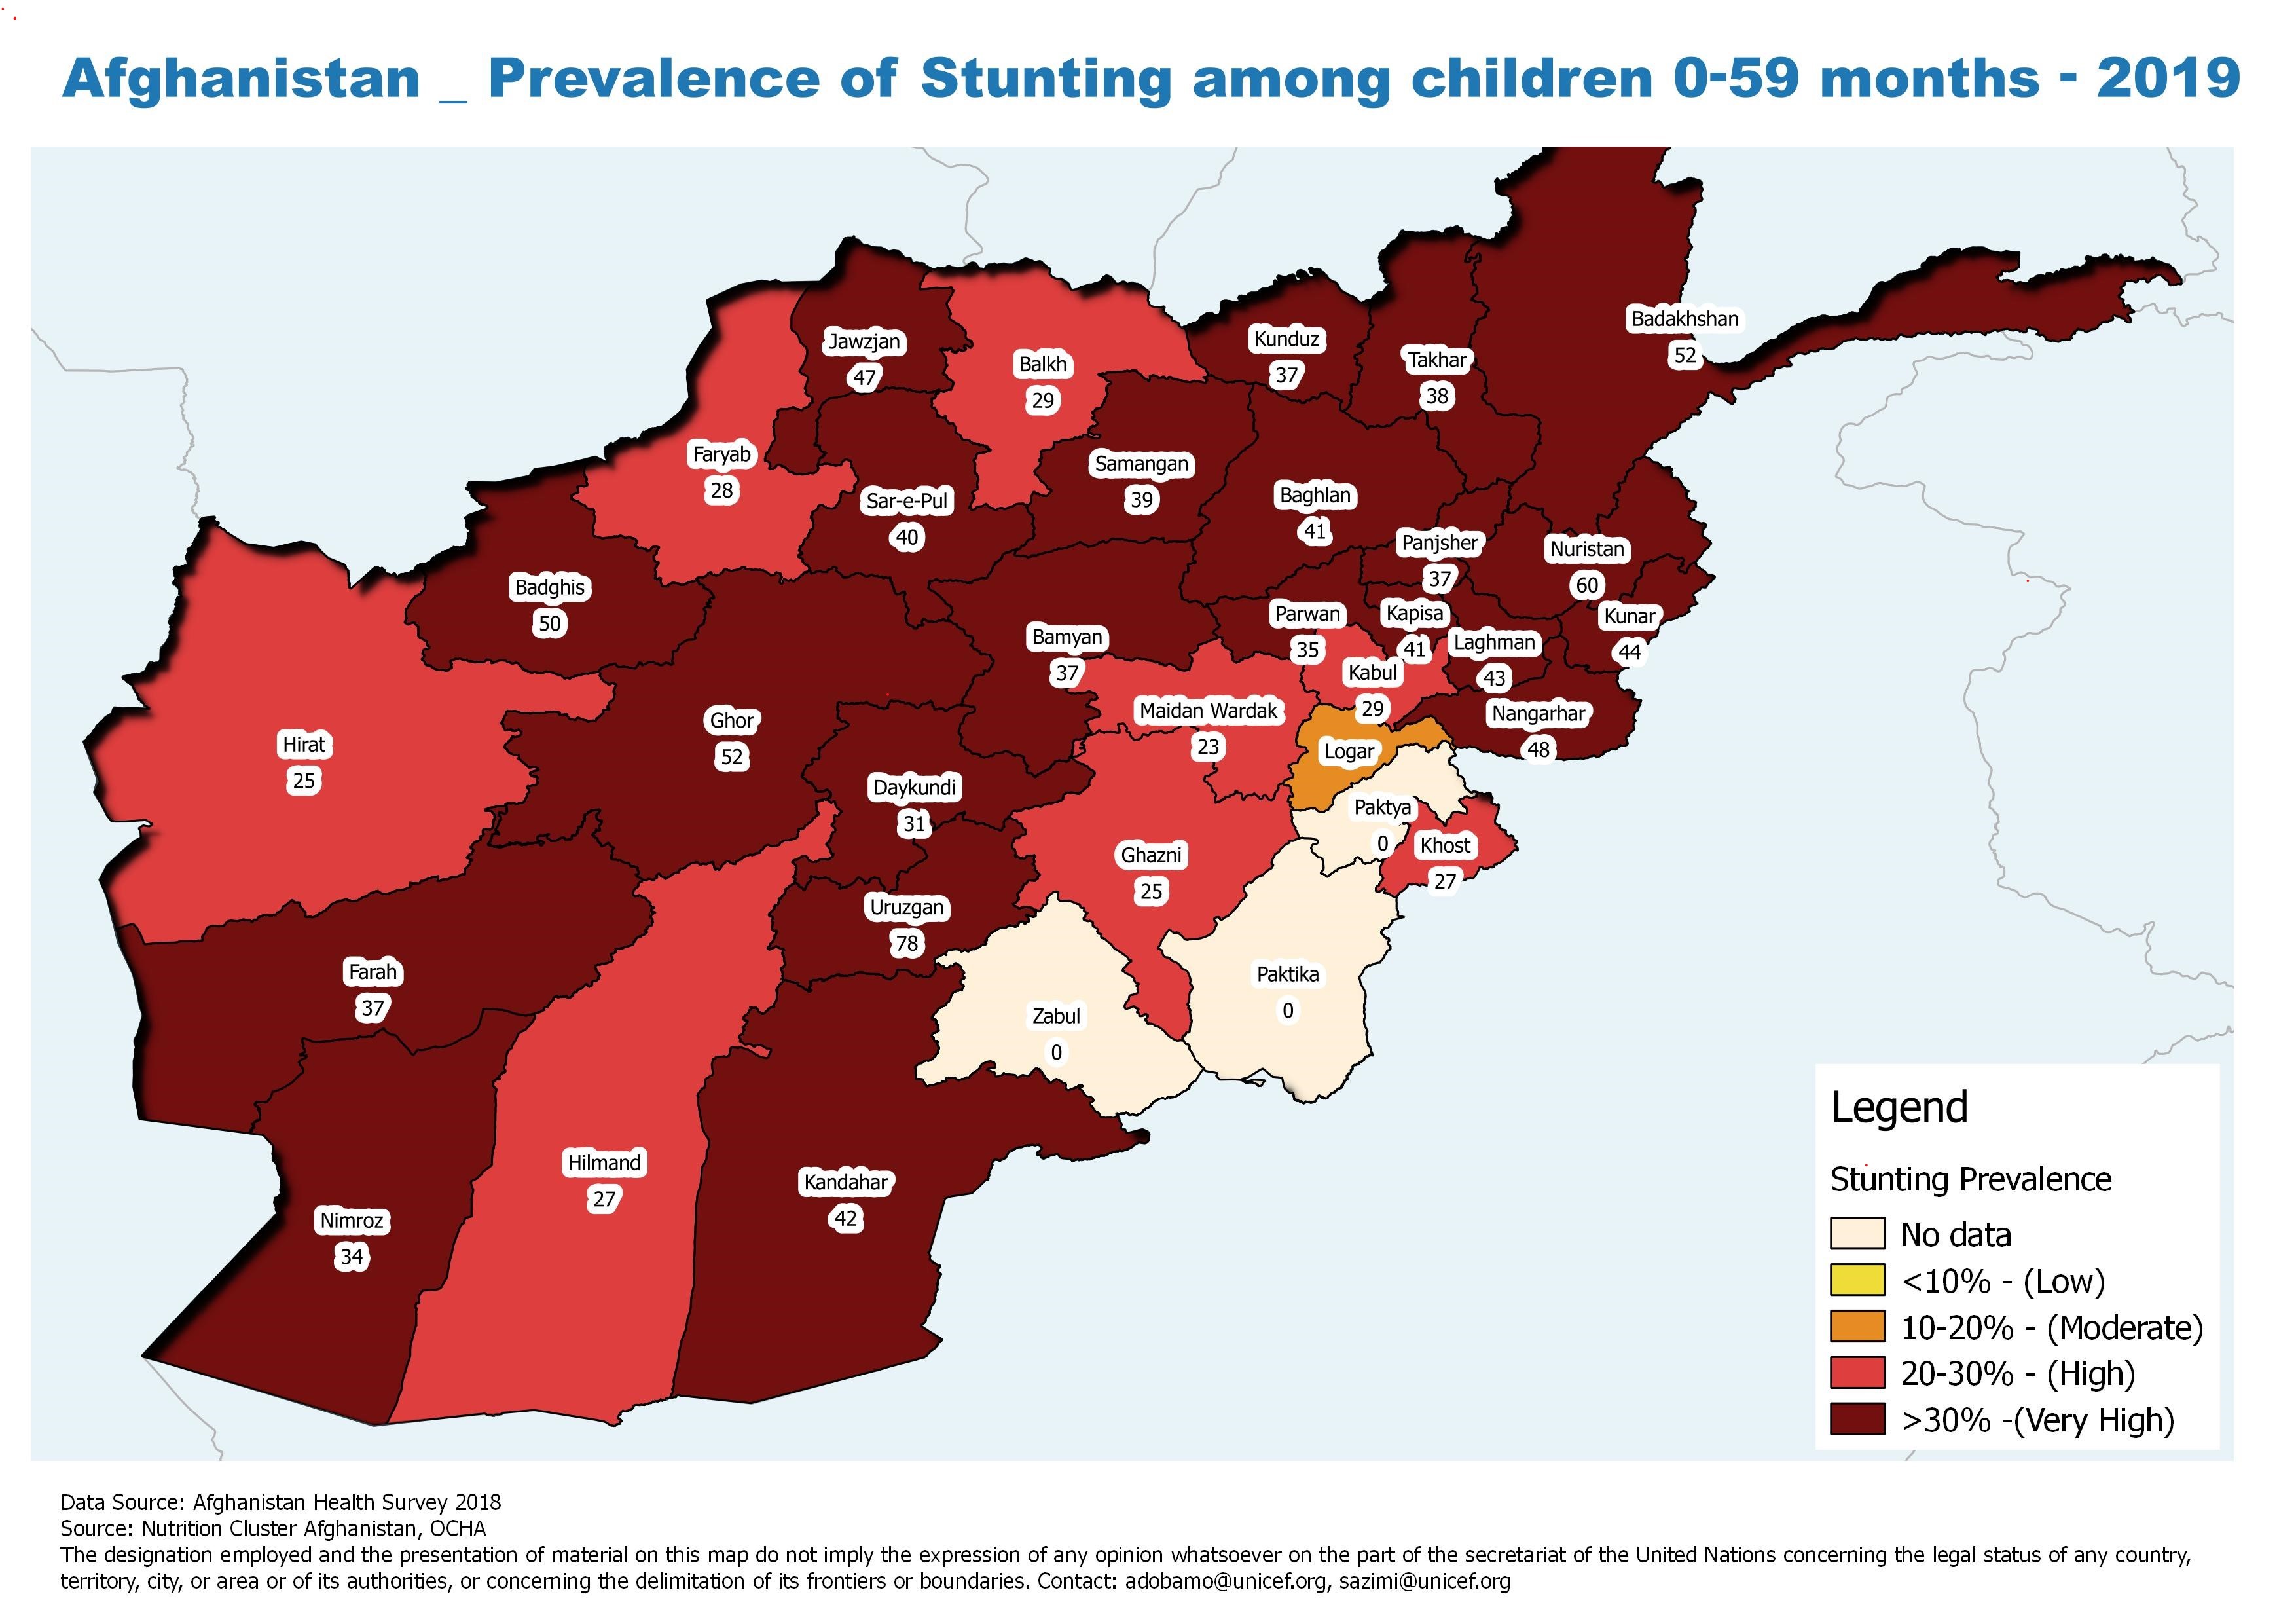 Afghanistan Prevalence of Stunting among children 0-59 months 2019